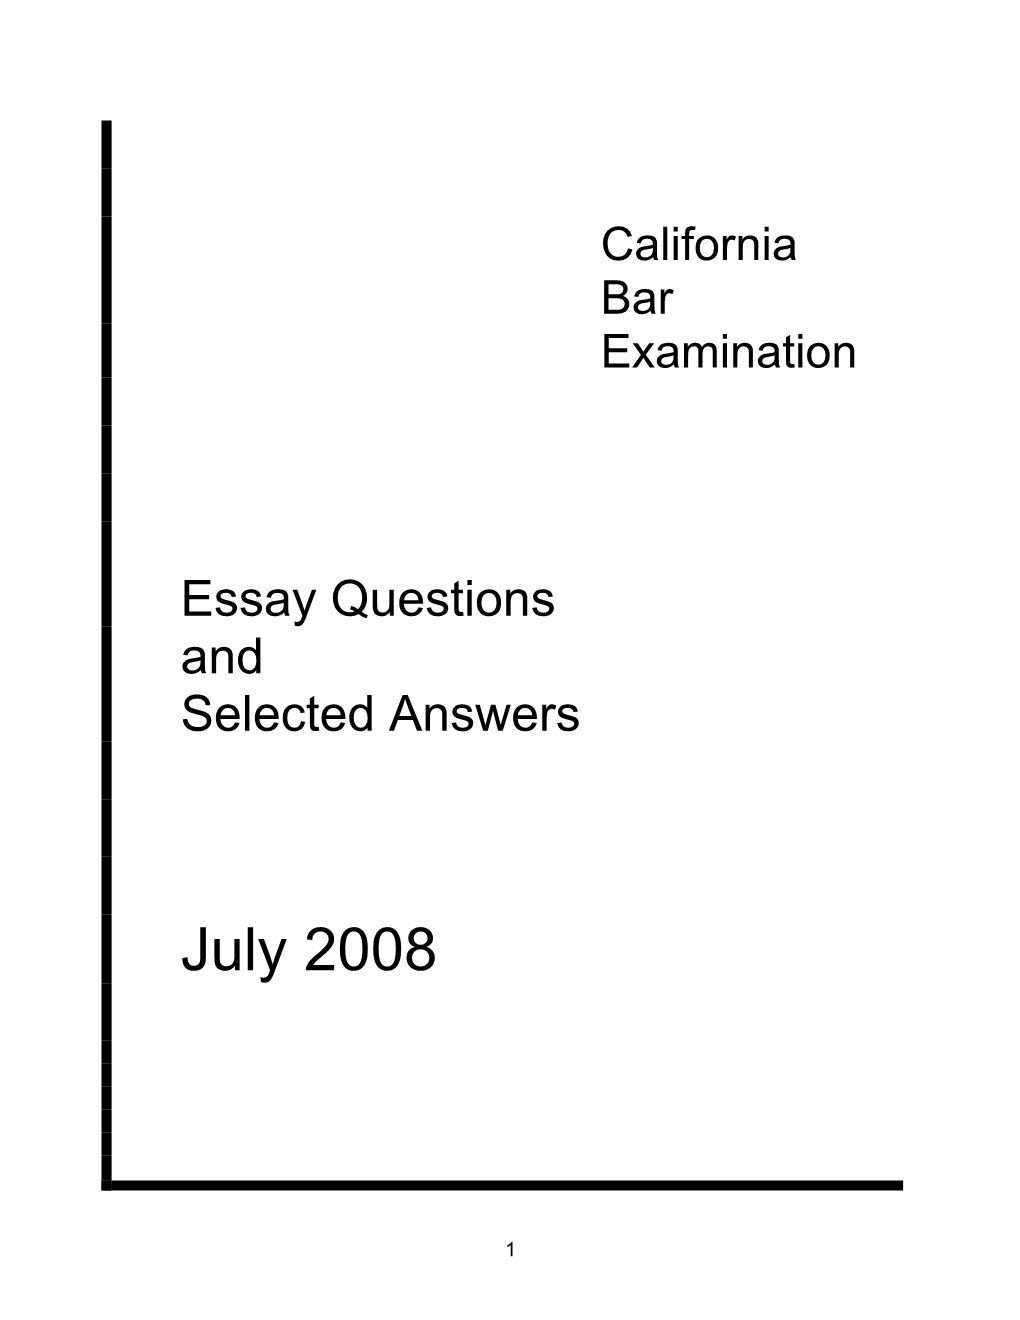 July 2008 Essays + Answers